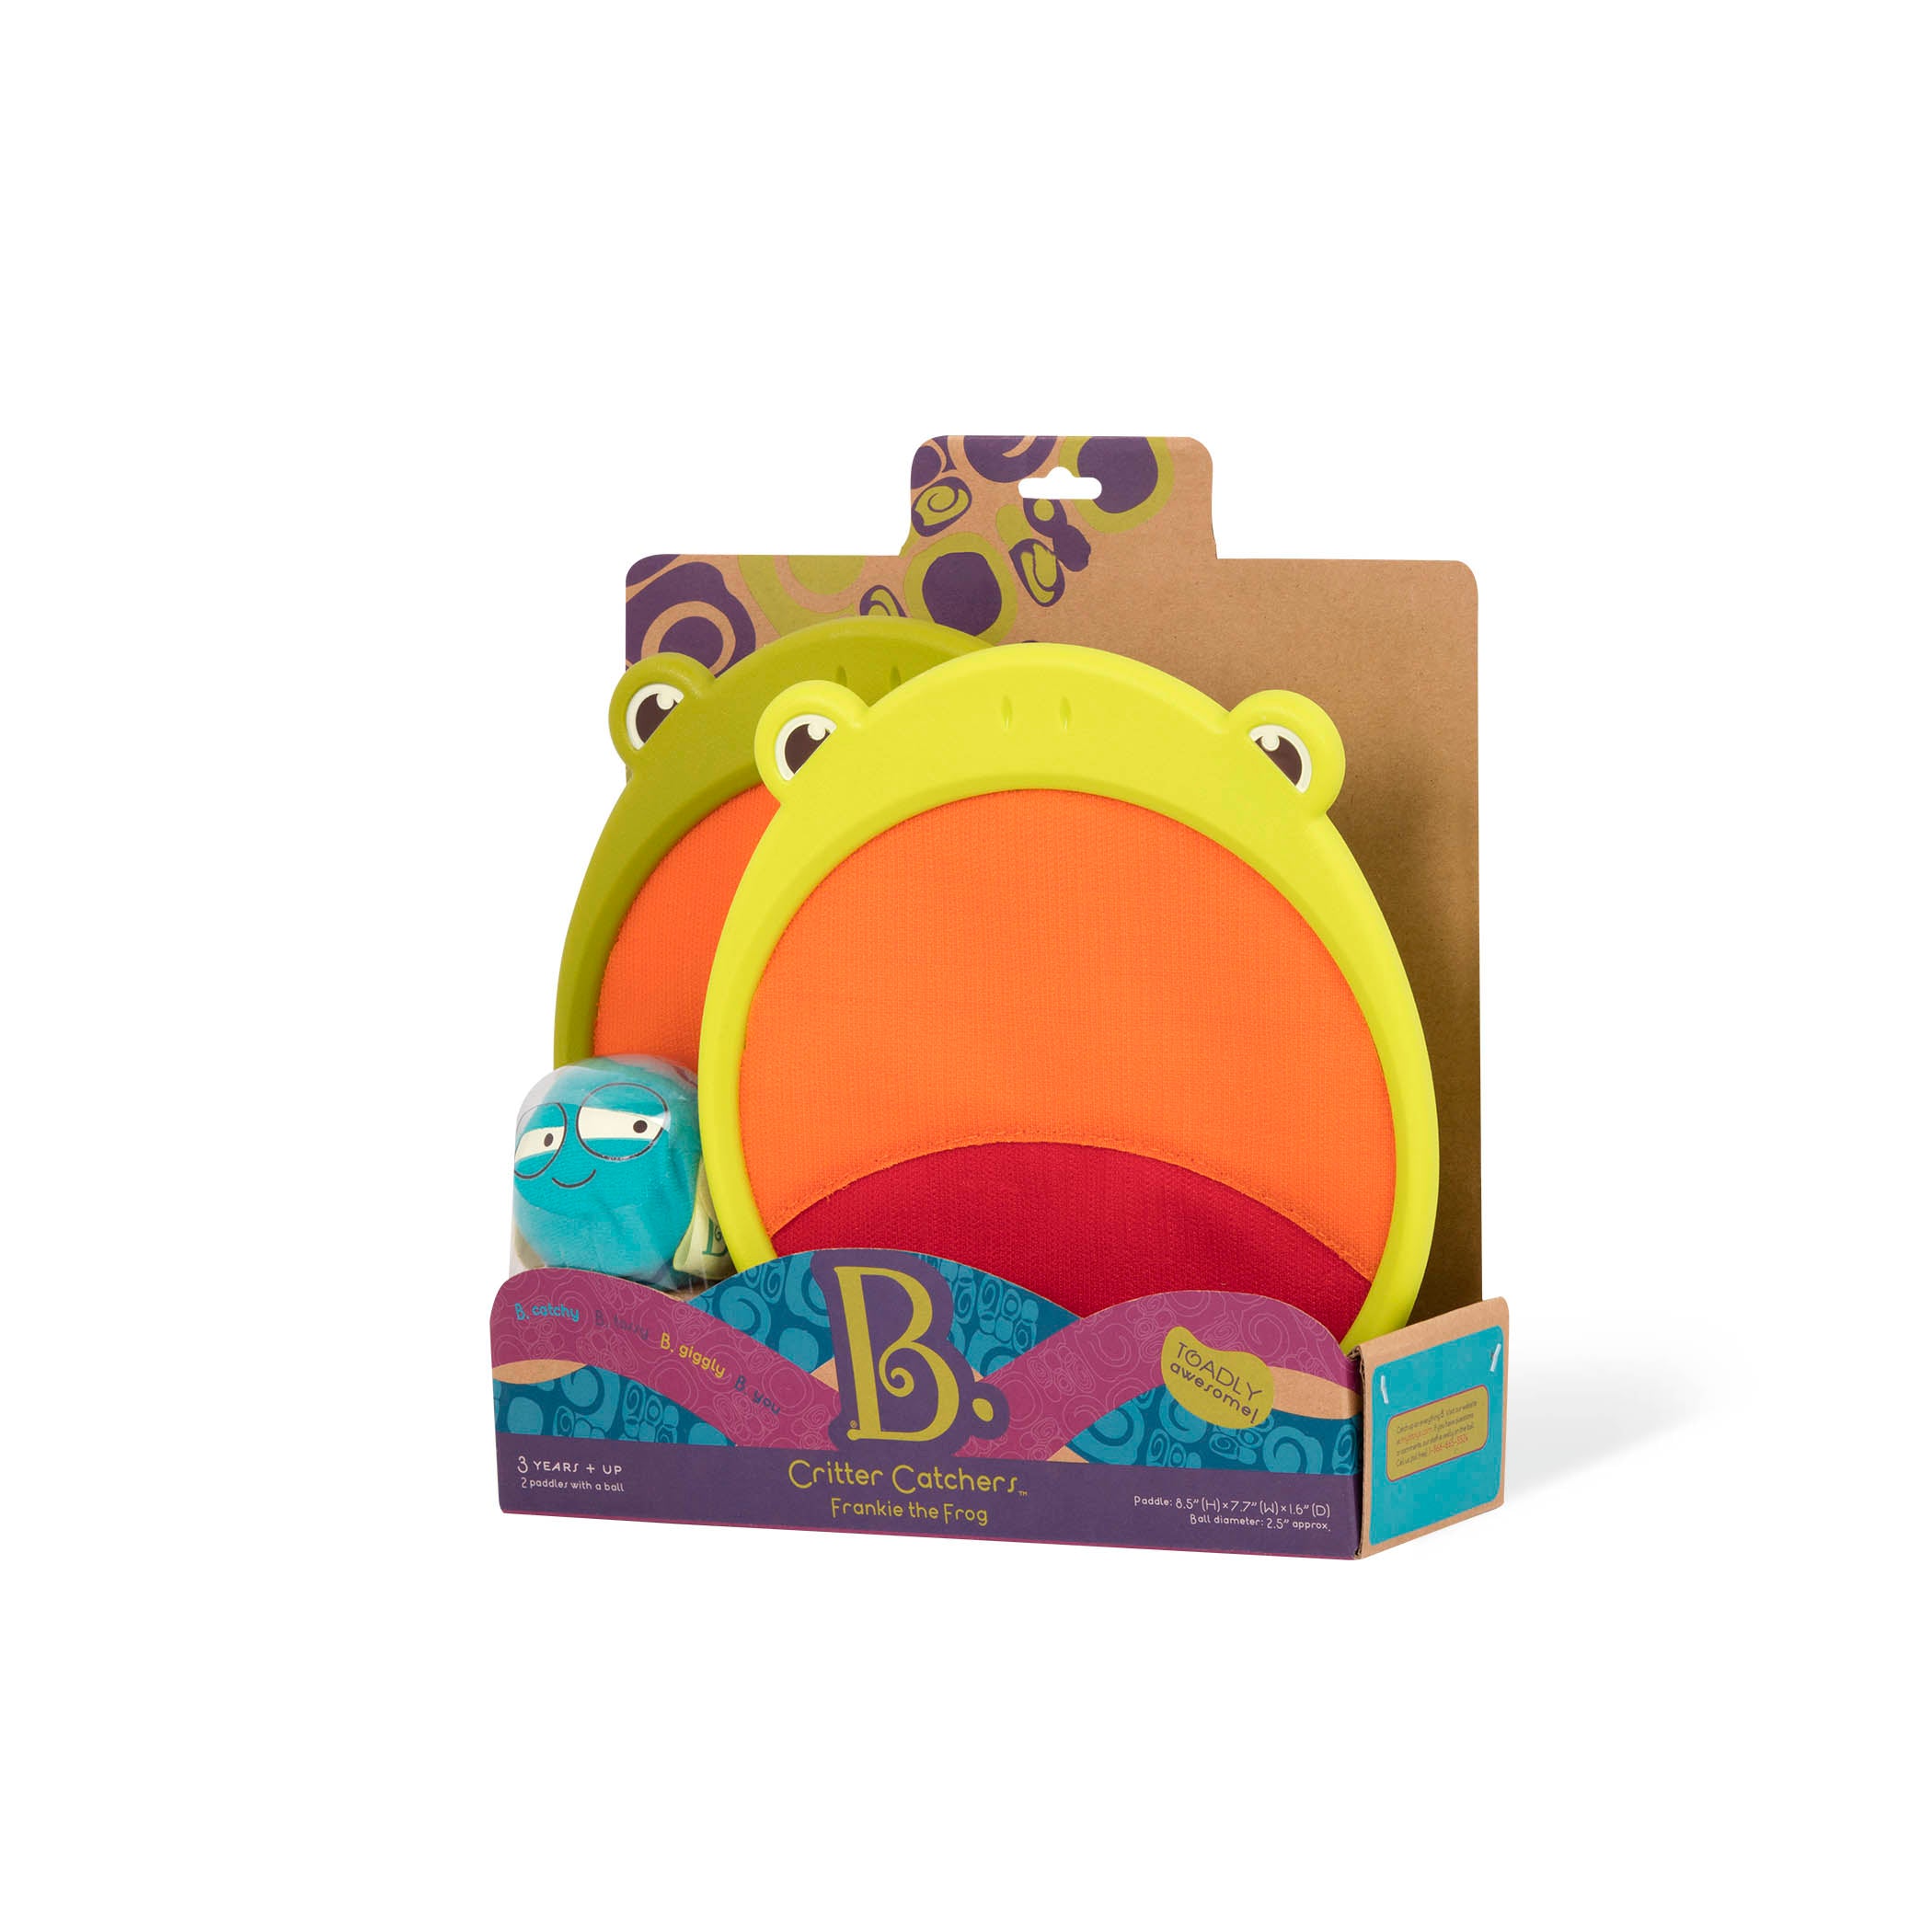 Frog design catch & toss game.